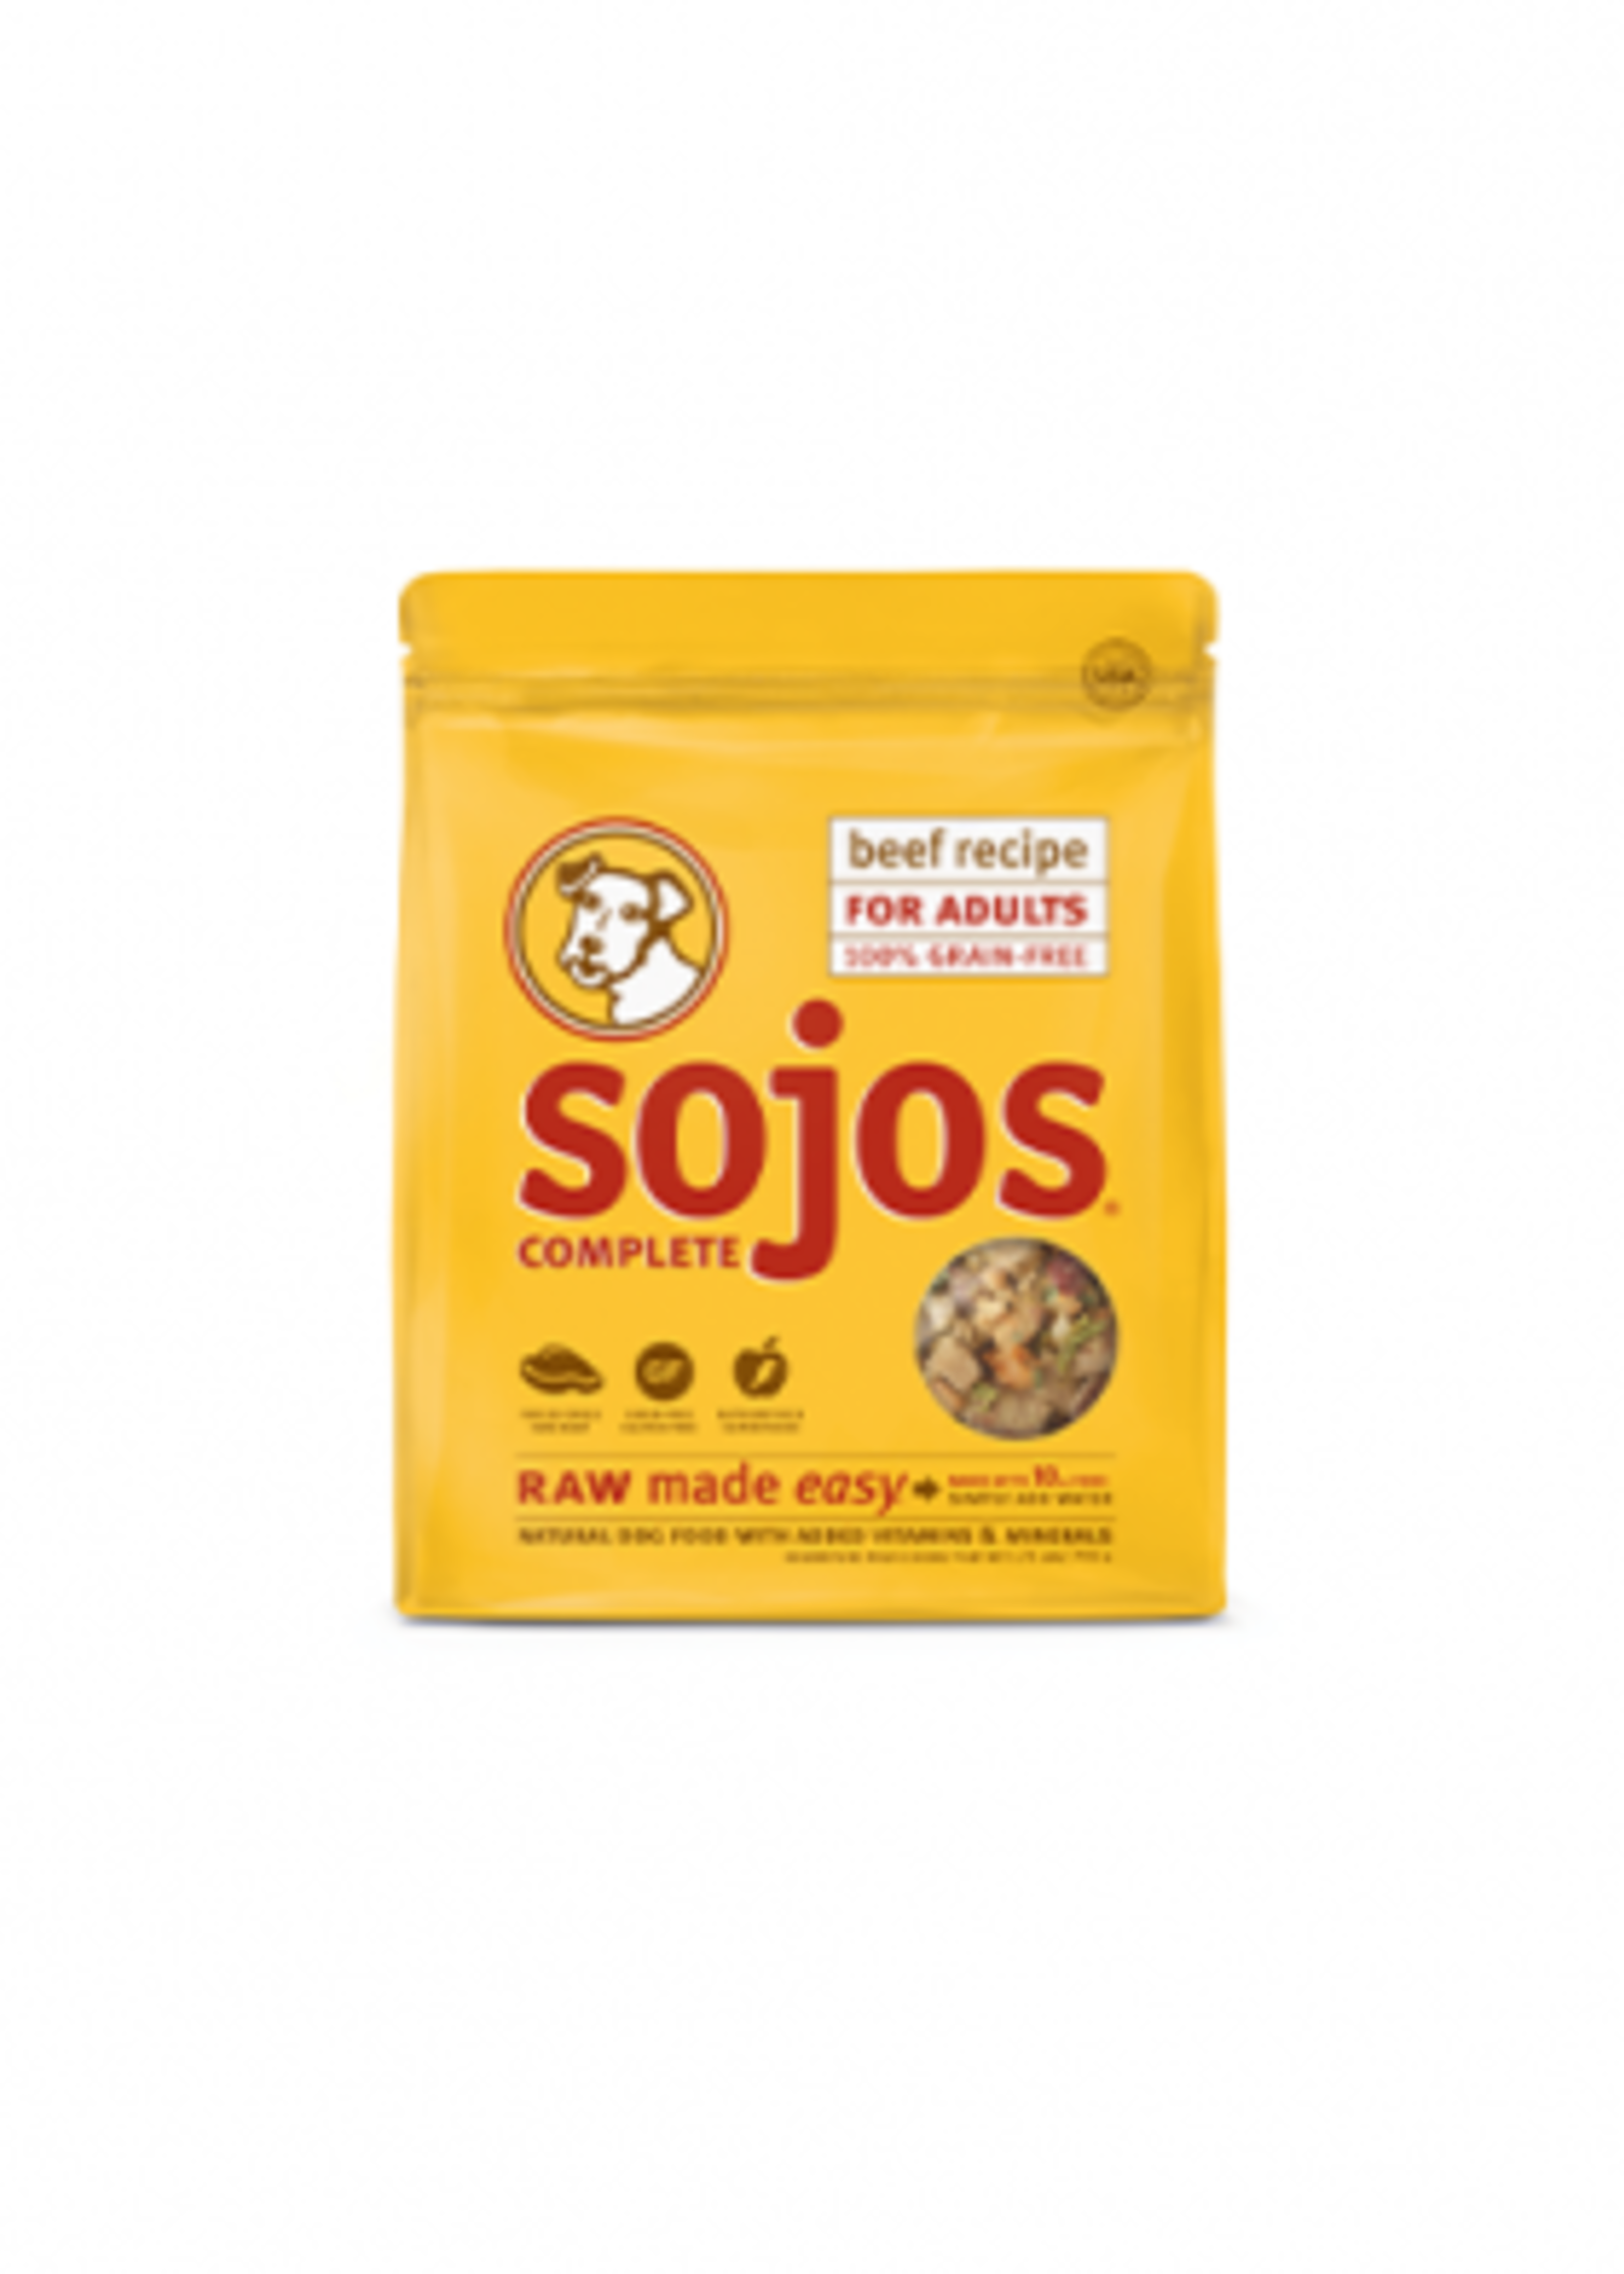 Sojos Complete Dog Food Mix Beef 1.75lb